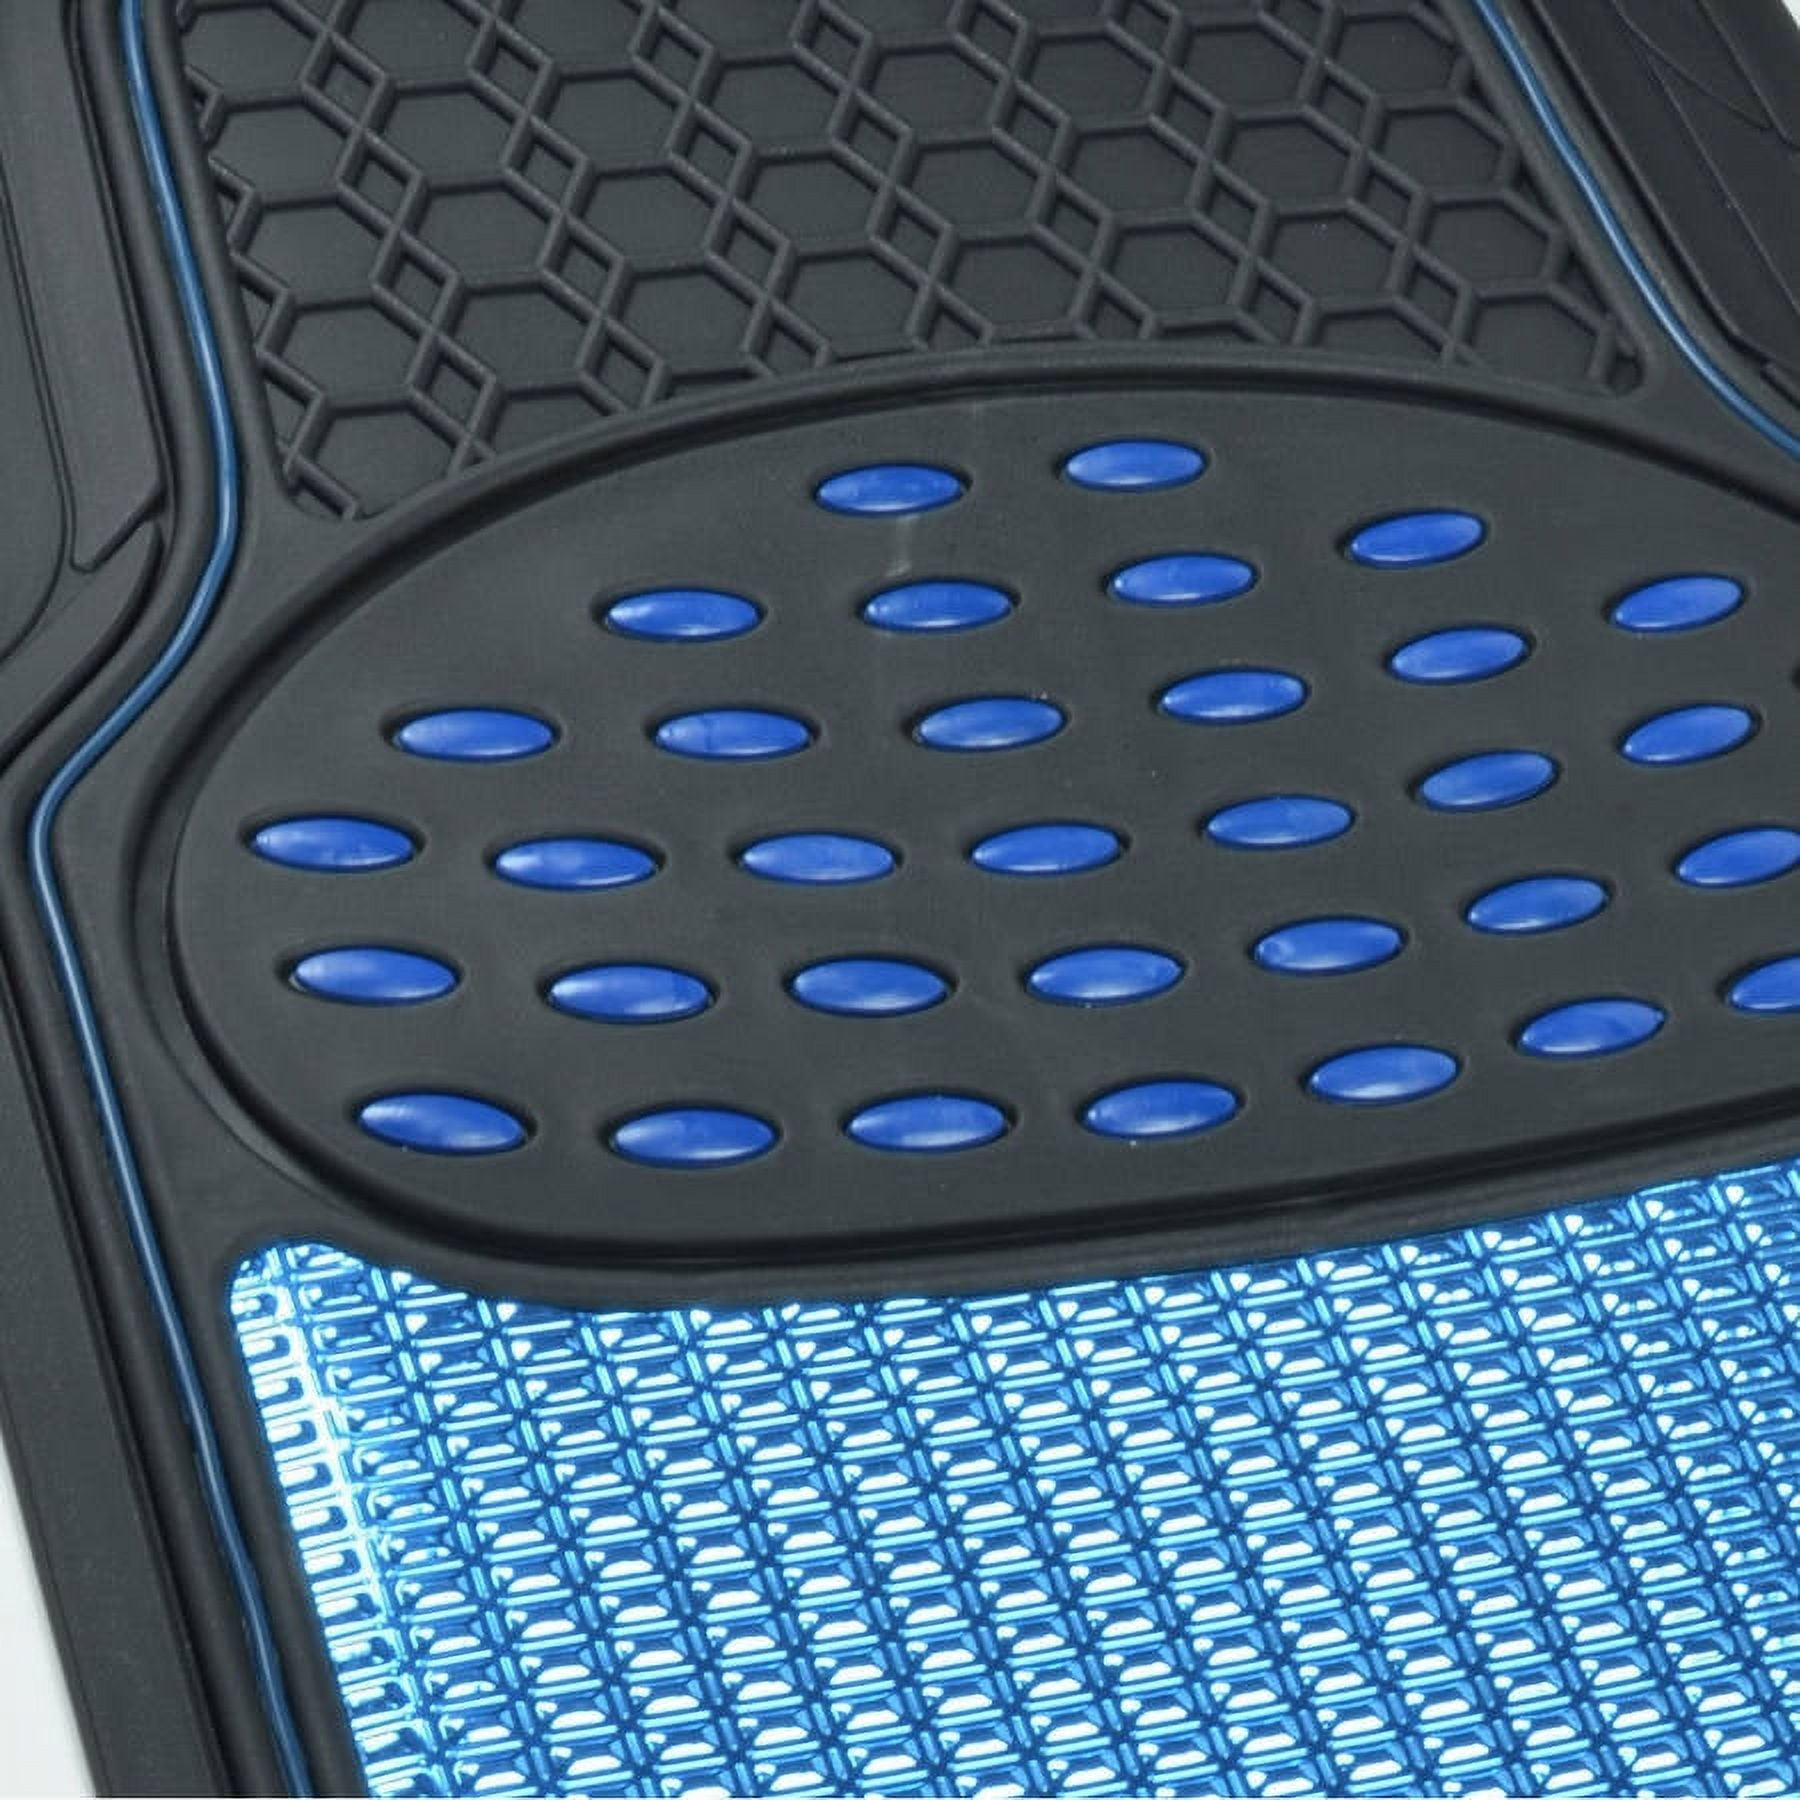 BDK M783 DuraChannel Heavy Duty Rubber Car Floor Mats Liner for Auto - All  Weather 3 Piece Set Front & Rear, Fits Car Truck SUV Van, Universal Trim to